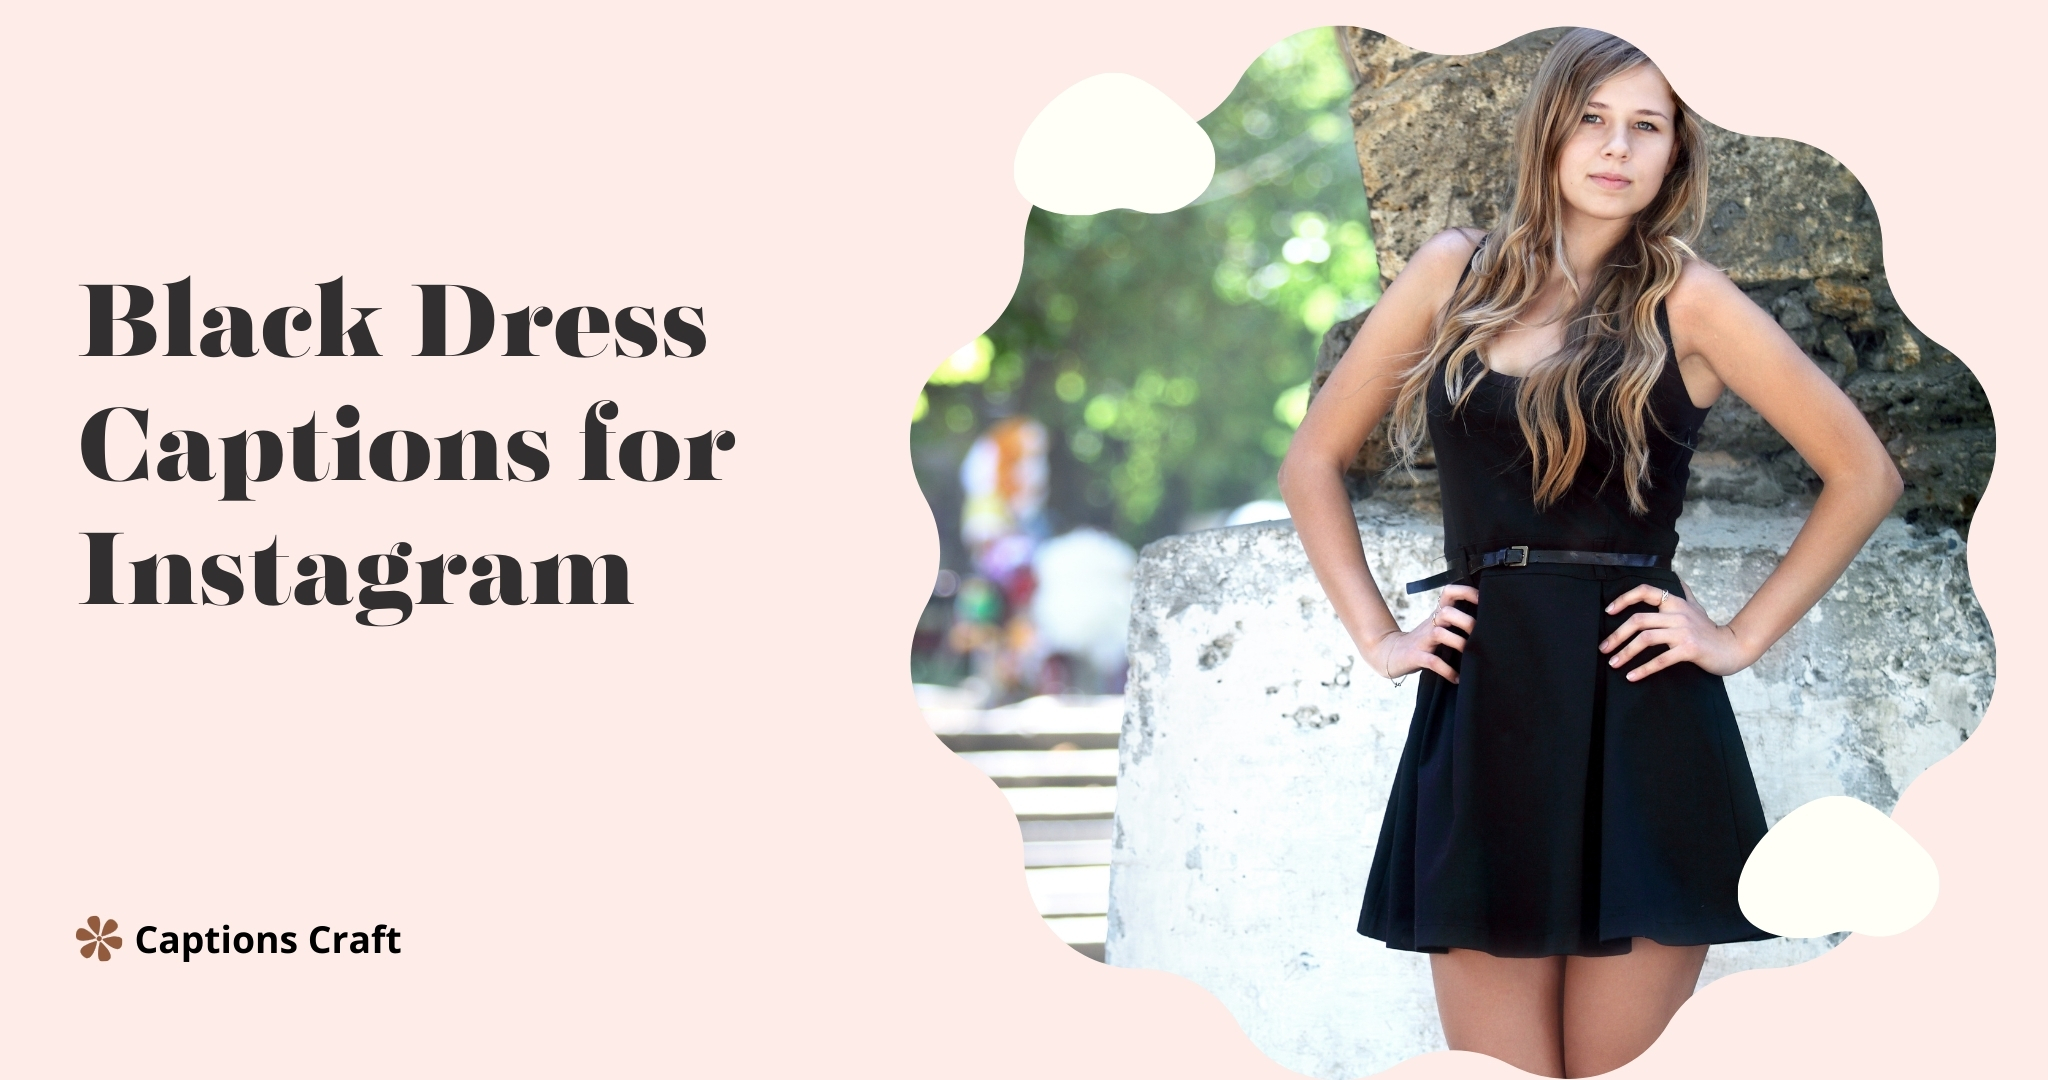 Black dress captions for Instagram: "Elegant and timeless, this black dress exudes sophistication and style. Perfect for any occasion."